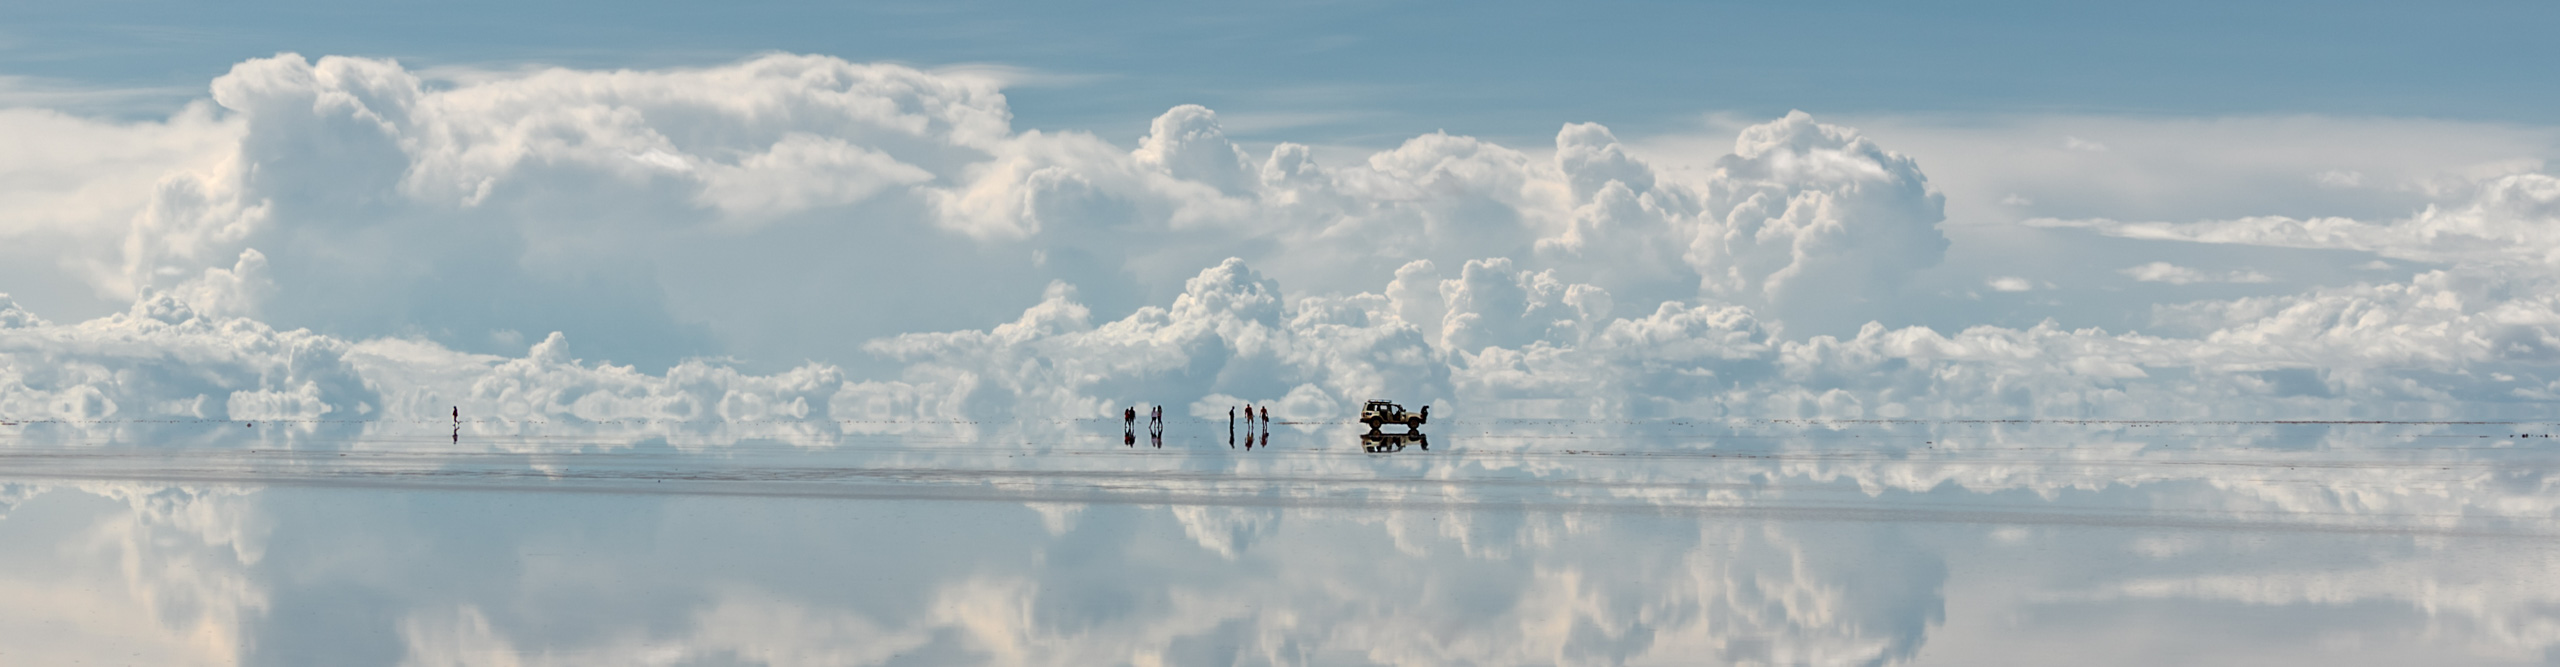 Travellers and 4WD in the middle of the Uyuni Salt Flats in Bolivia